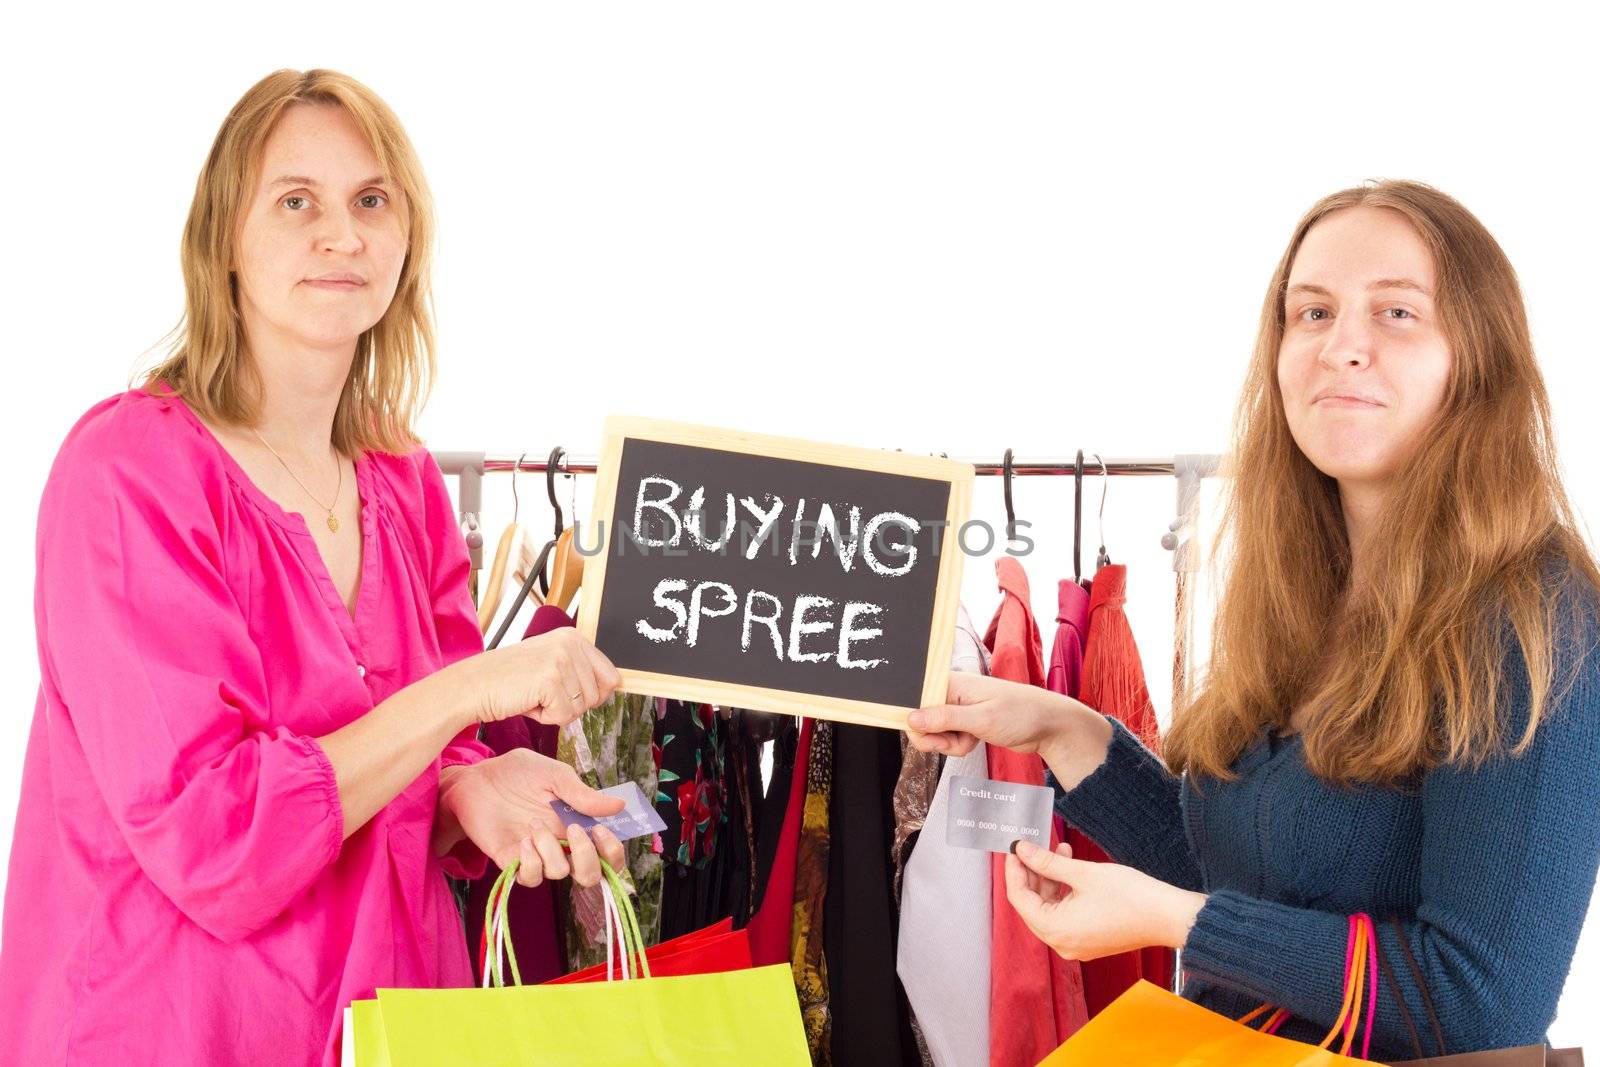 People on shopping tour: buying spree